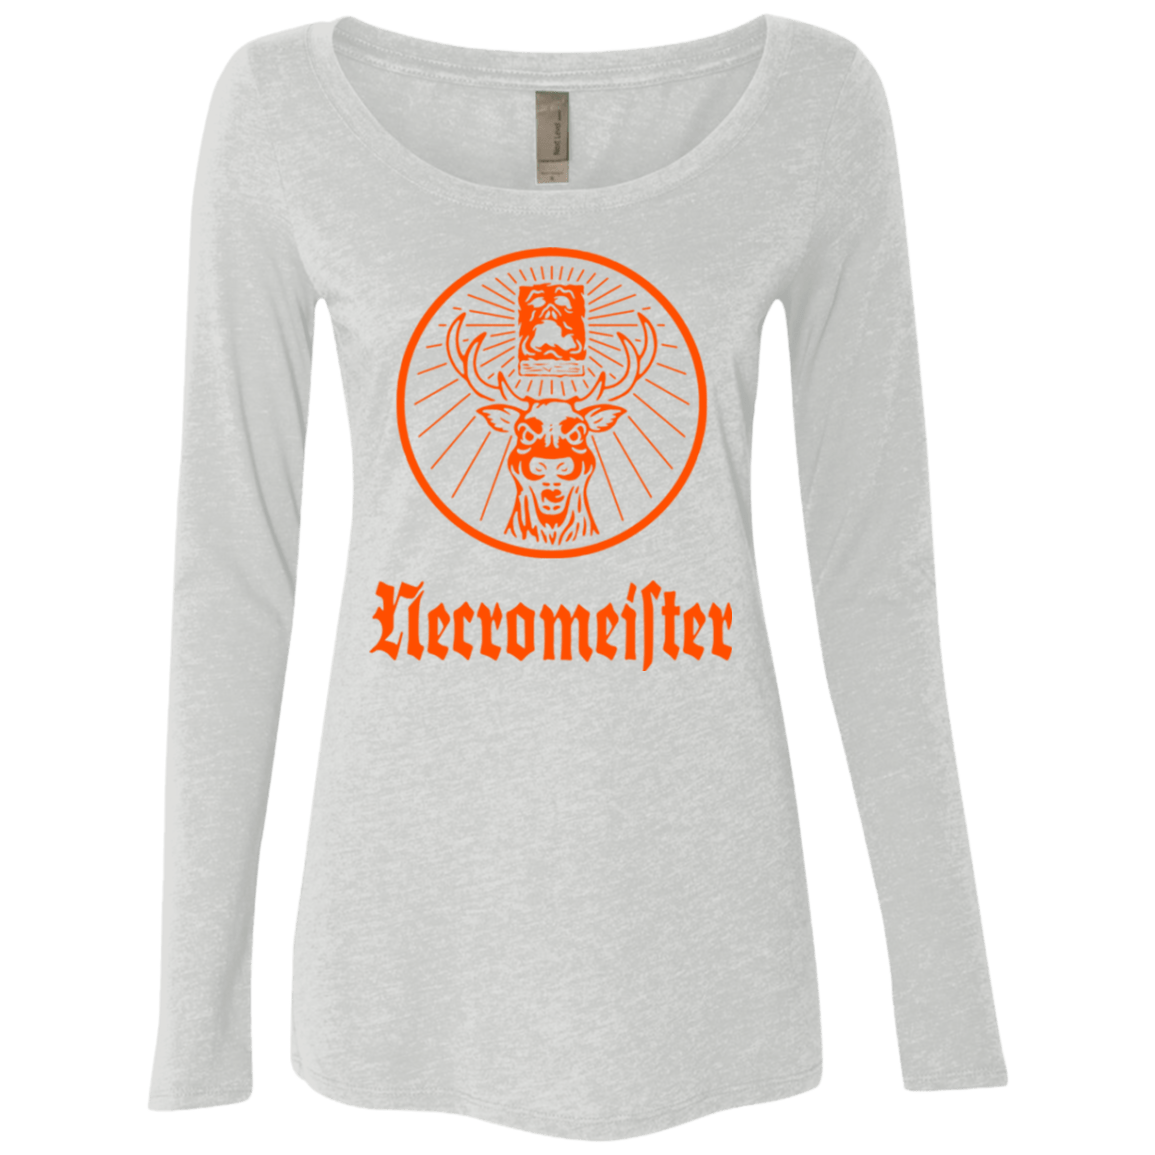 T-Shirts Heather White / Small NECROMEISTER Women's Triblend Long Sleeve Shirt